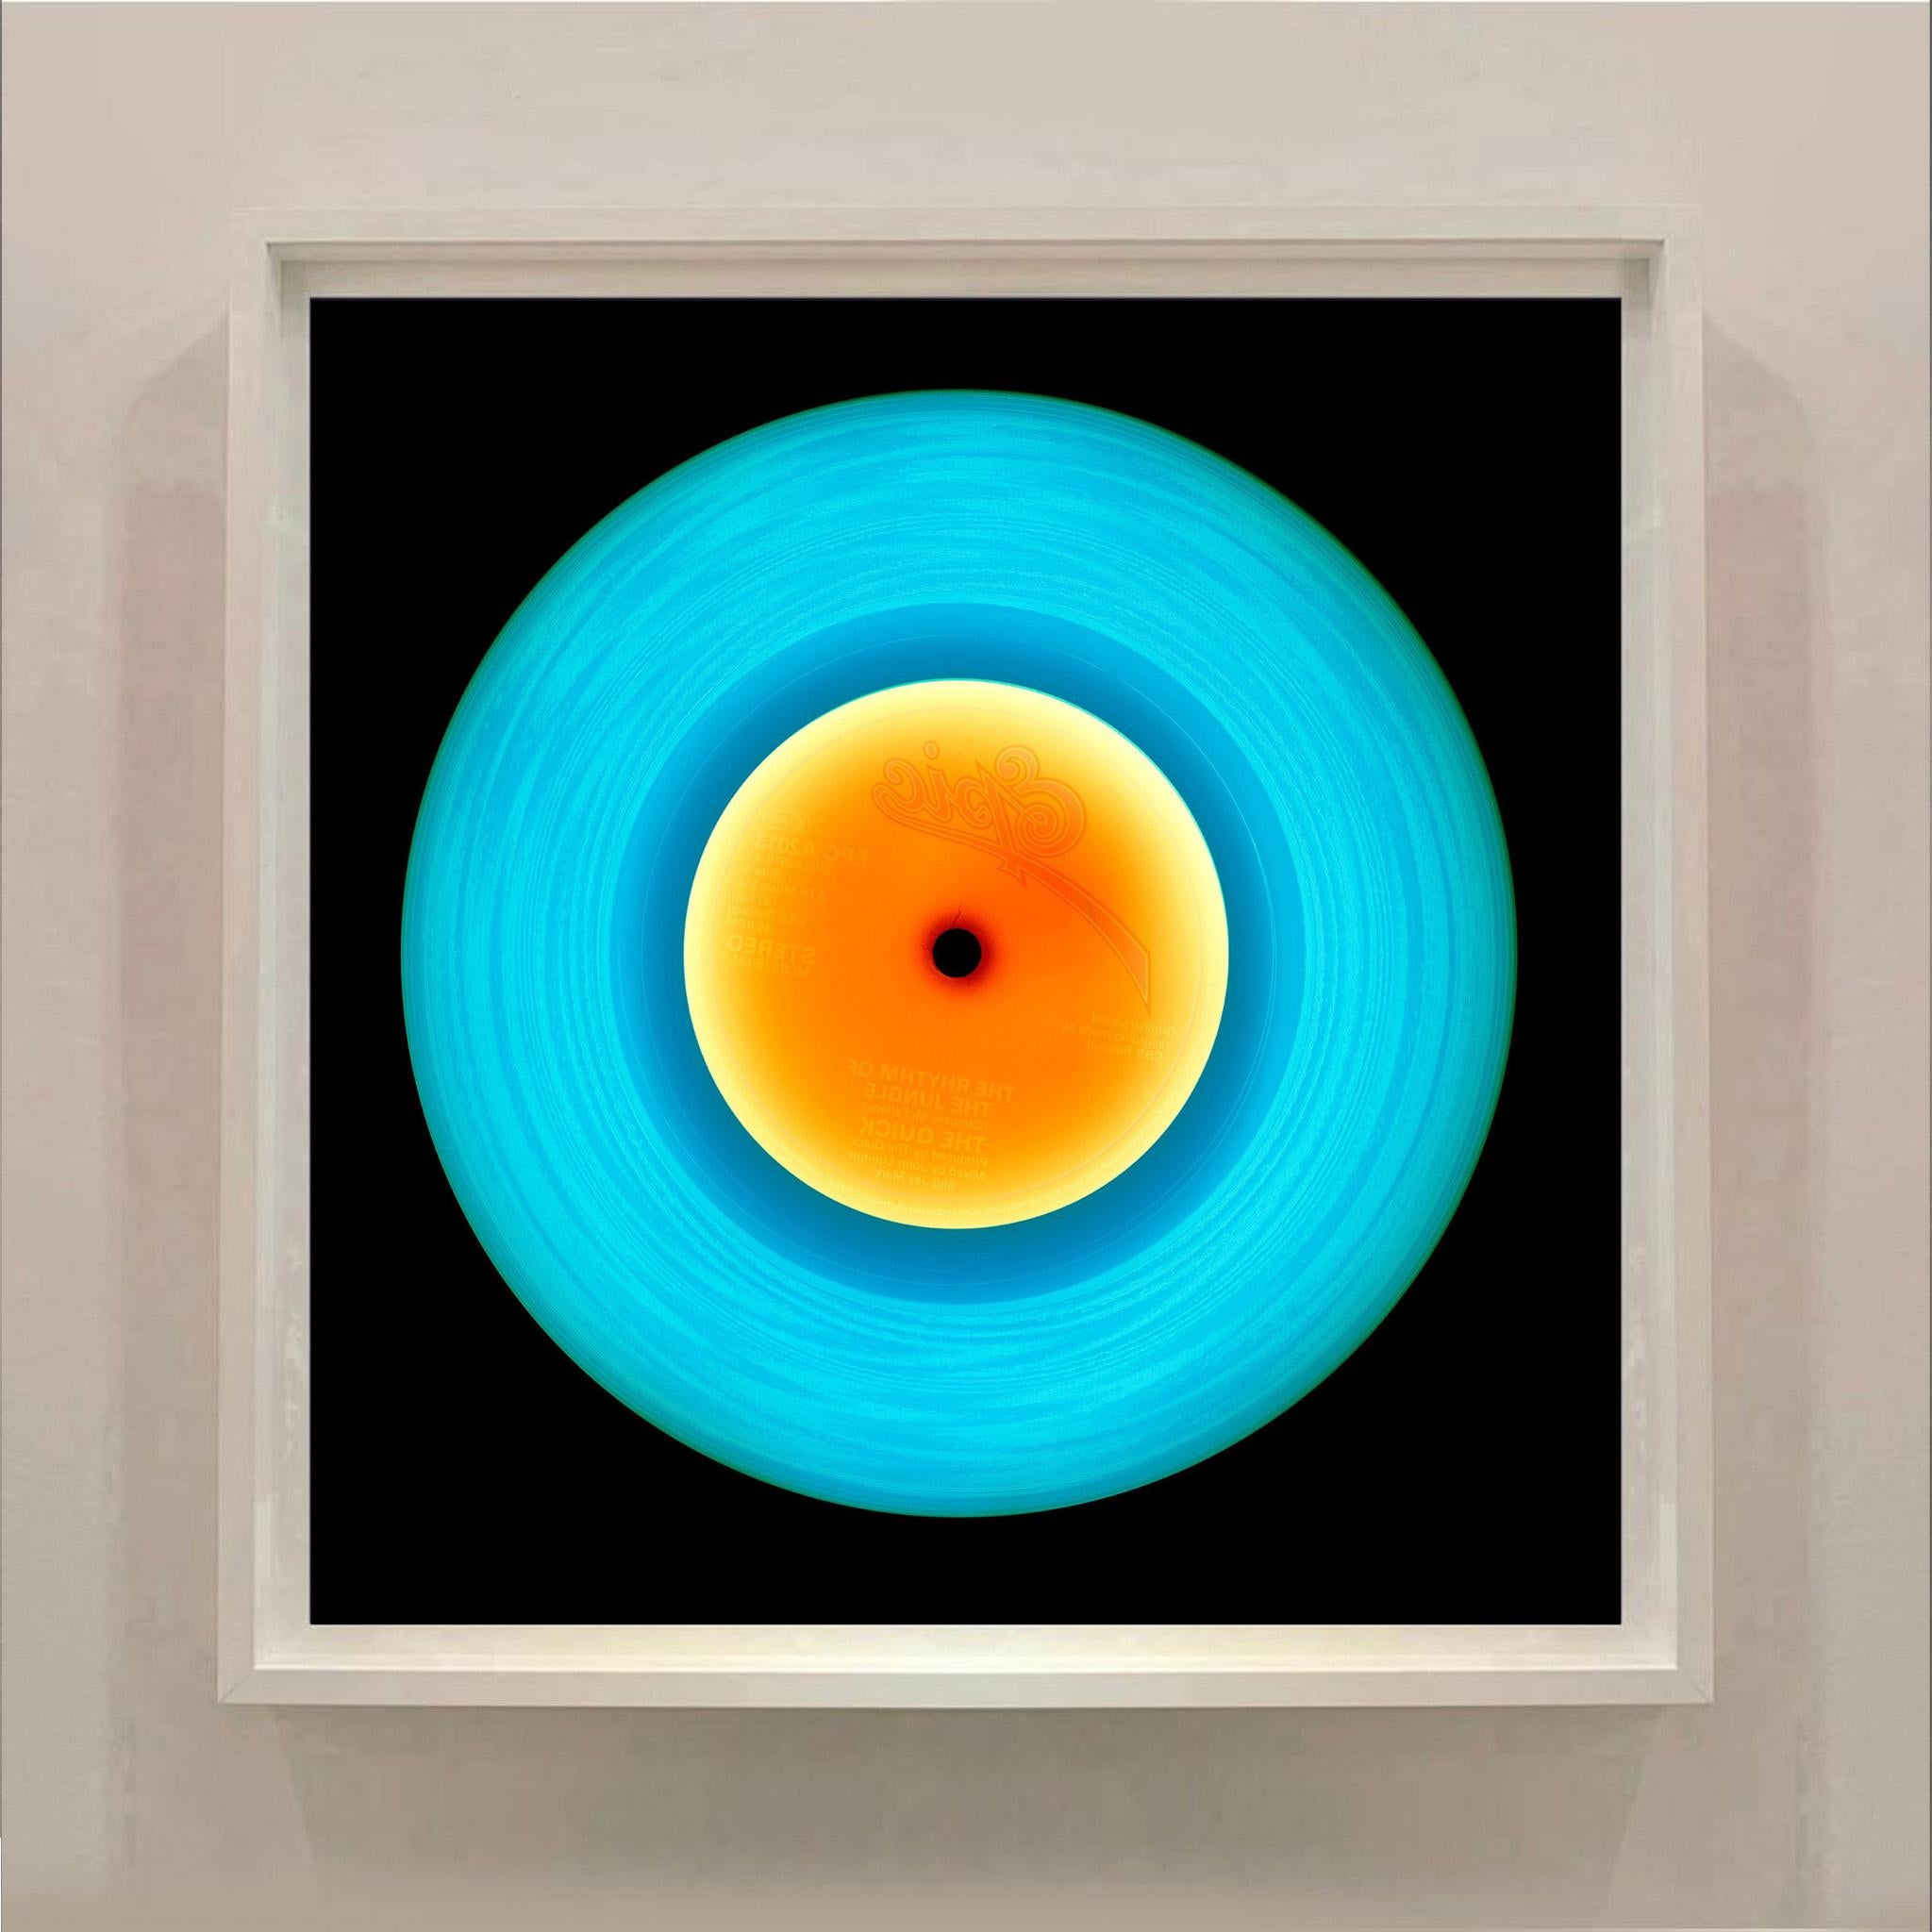 1981 Blue Orange, from the Heidler & Heeps Vinyl Collection.
Acclaimed contemporary photographers, Richard Heeps and Natasha Heidler have collaborated to make this beautifully mesmerising collection. A celebration of the vinyl record and analogue